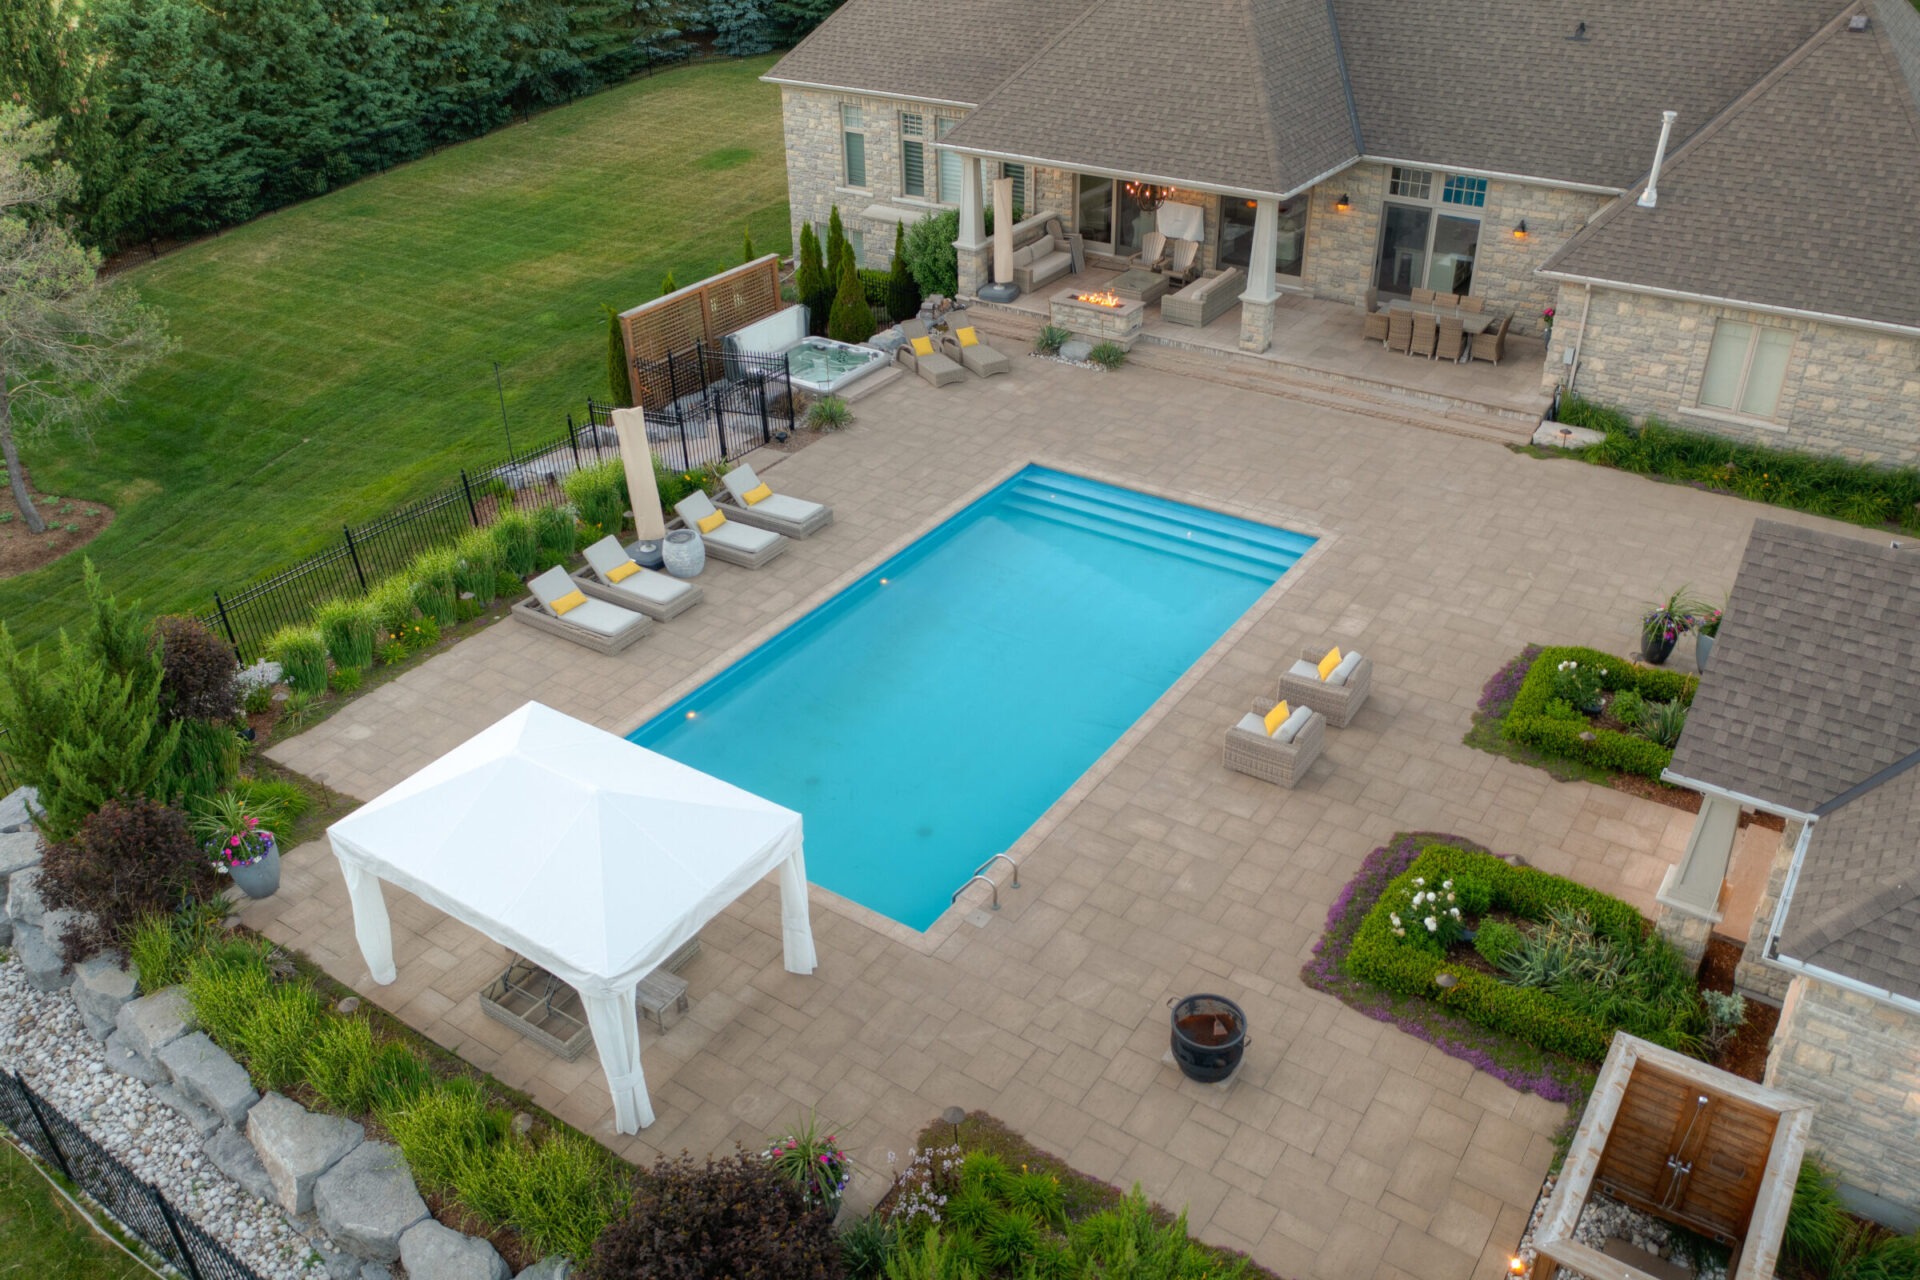 This is an aerial view of a backyard with a rectangular pool, patio, outdoor furniture, a gazebo, a hot tub, and landscaped garden areas.